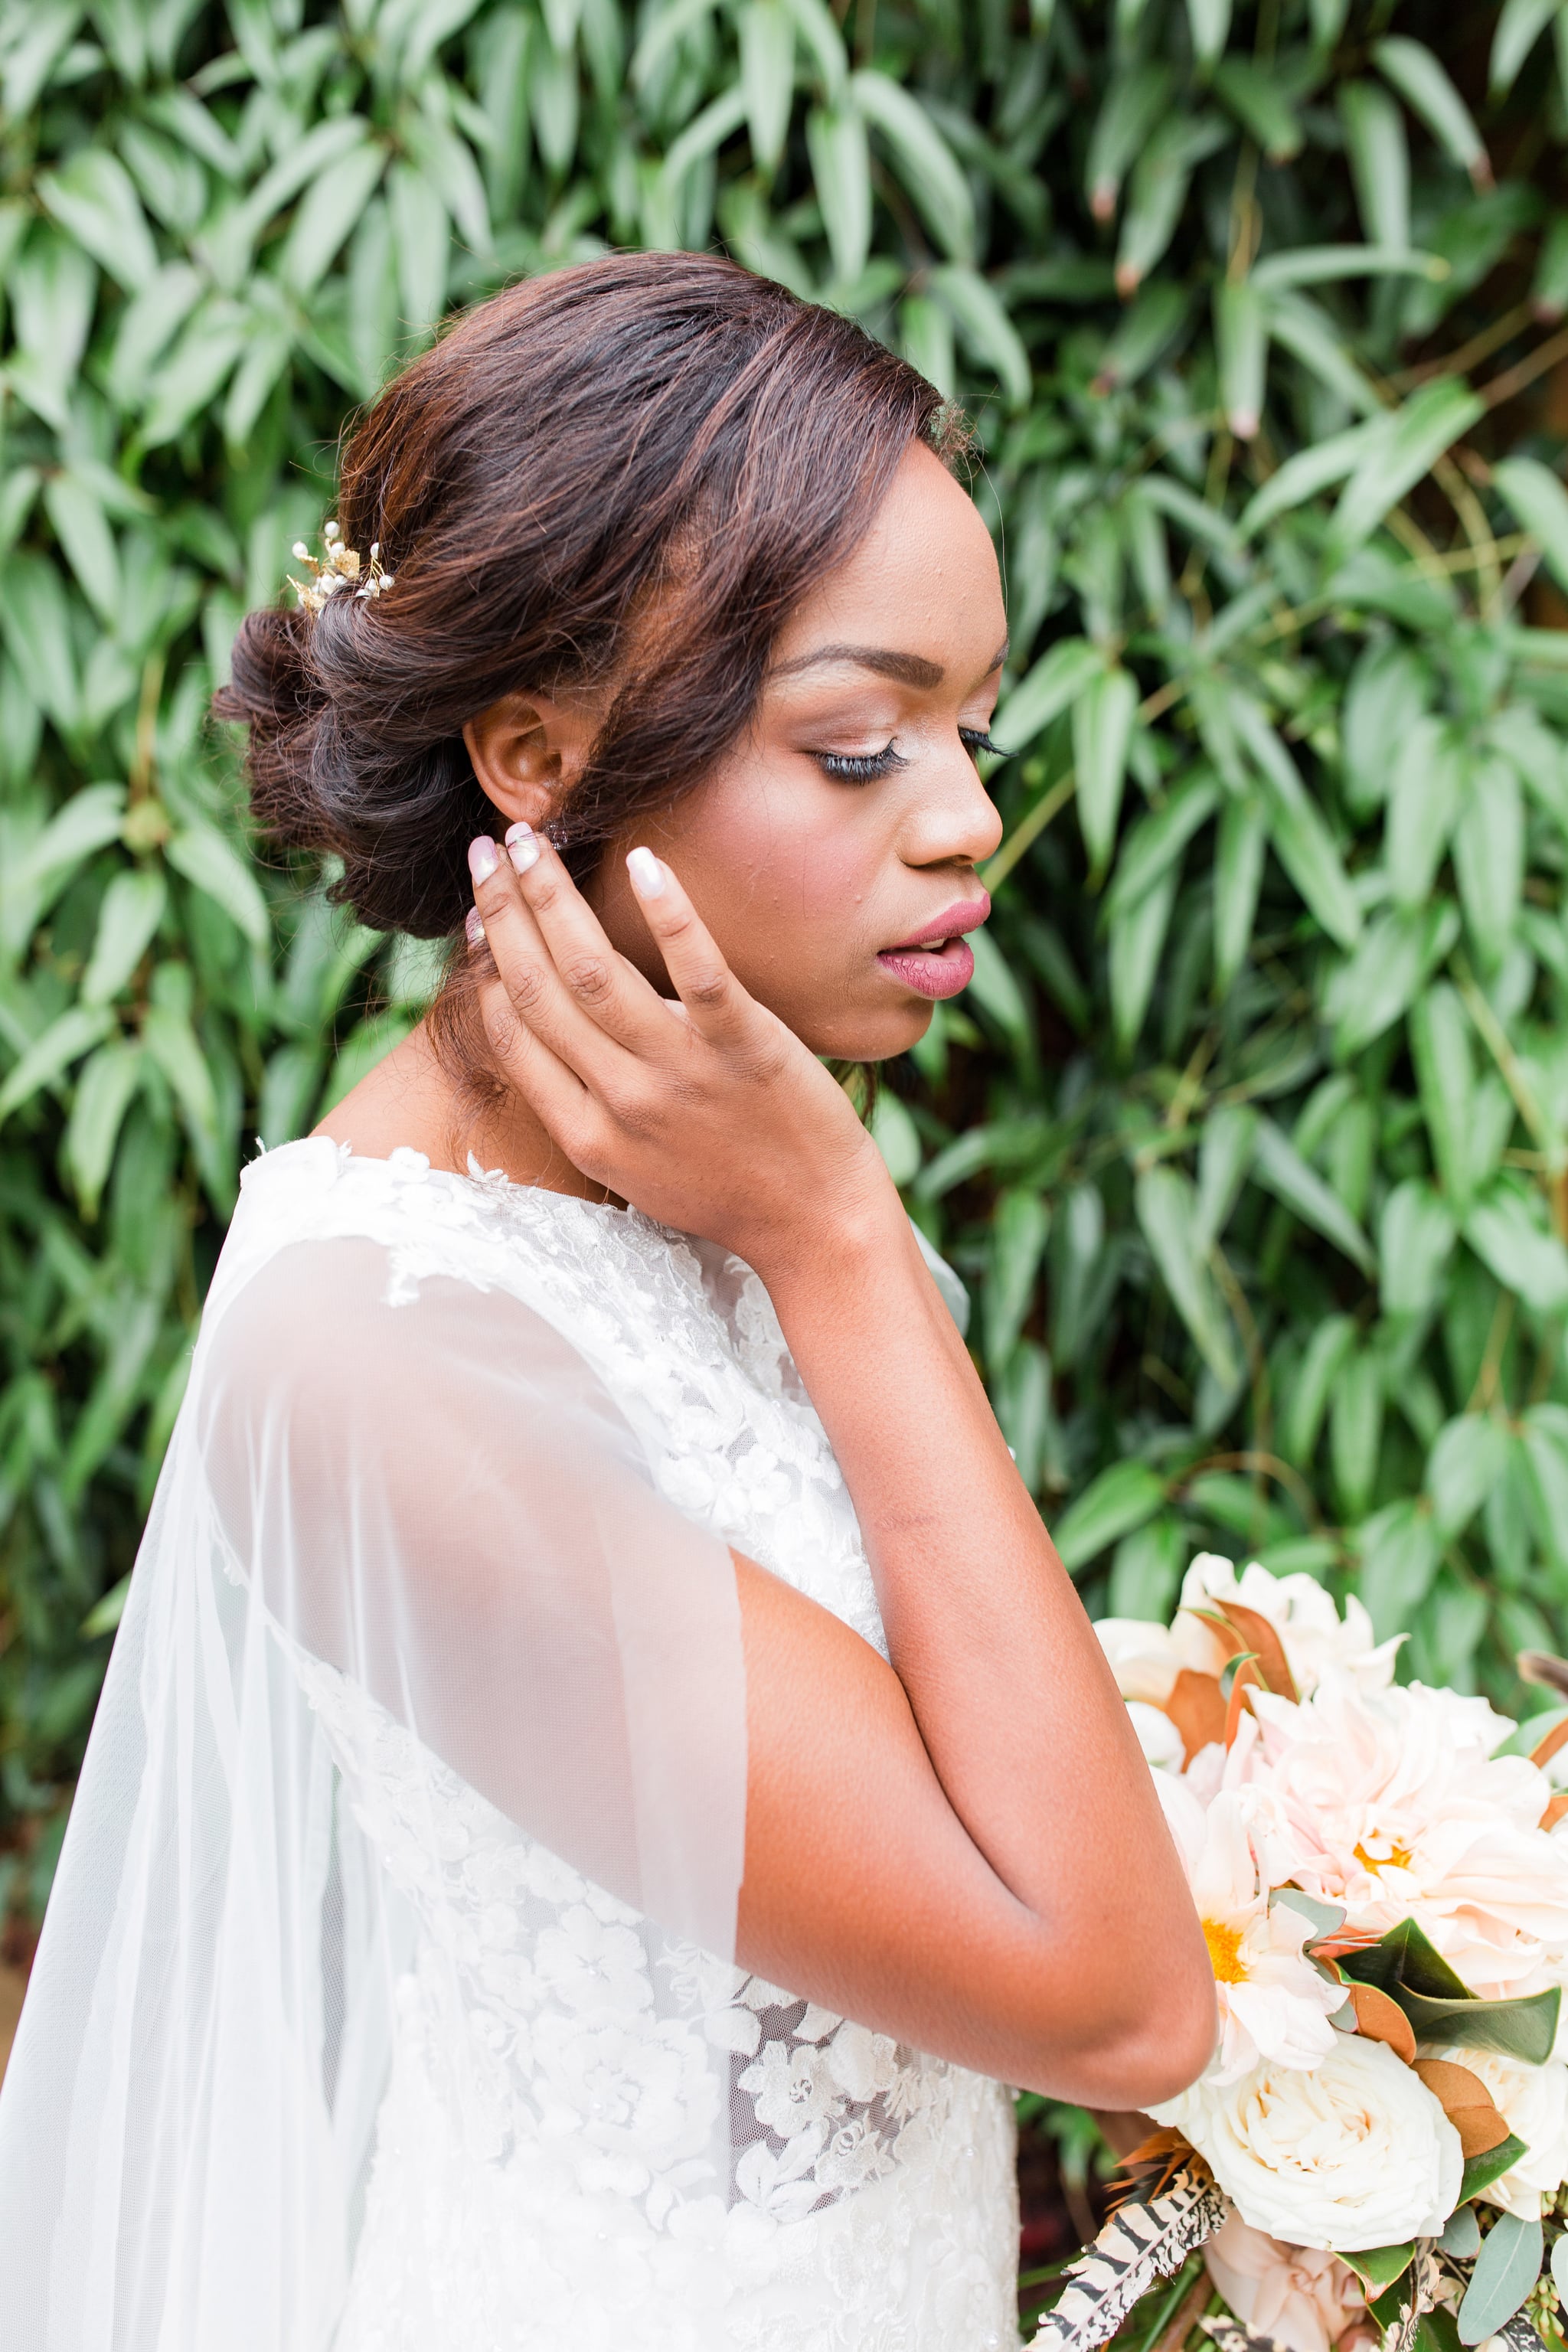 5 Wedding Hairstyles That Are Perfect With a Veil - Wed Vibes